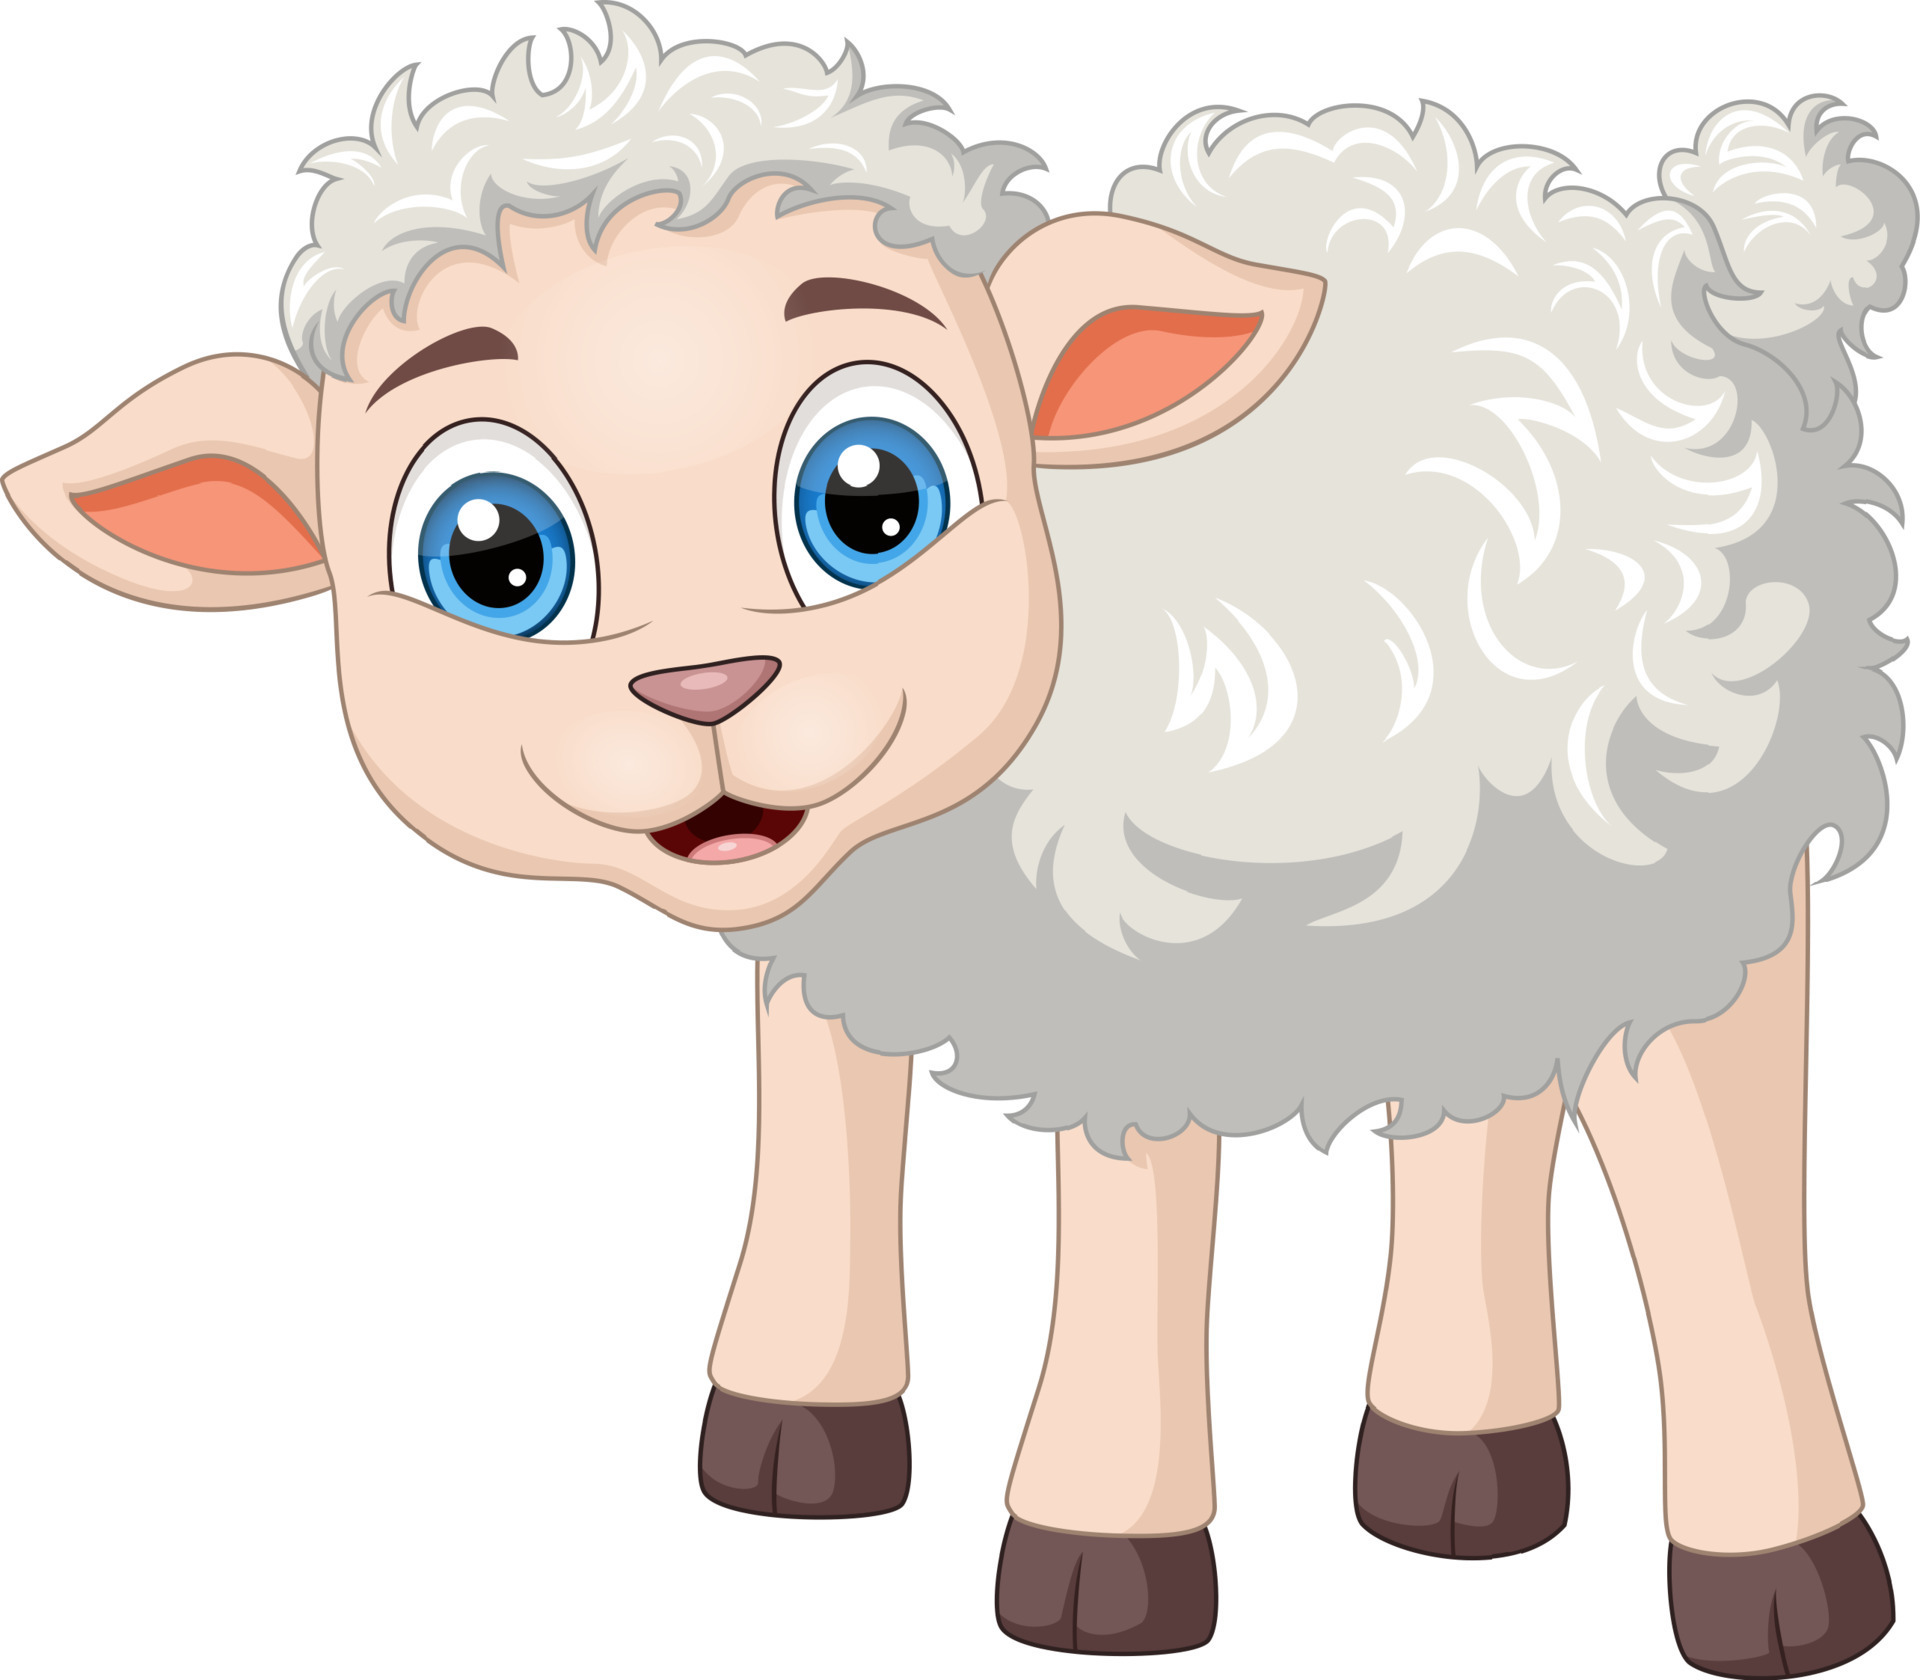 Cute baby sheep cartoon on white background 9780527 Vector Art at Vecteezy